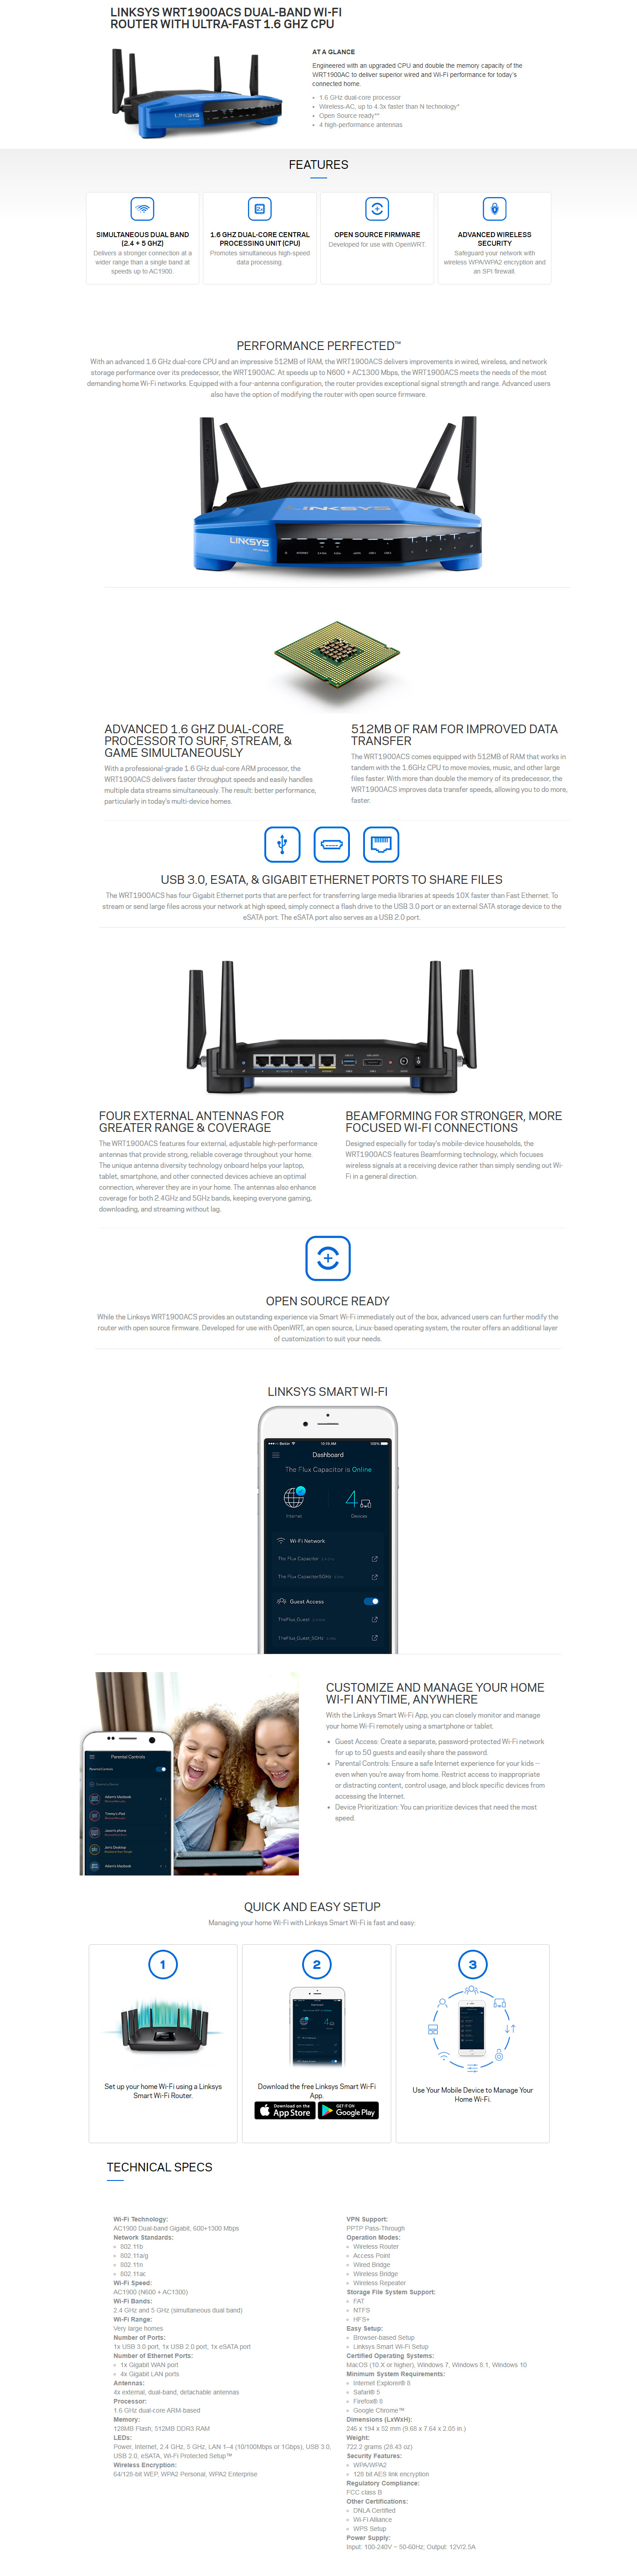 Linksys WRT1900ACS Dual Band Wi-Fi Router Ultra-Fast 1.6 Ghz CPU features